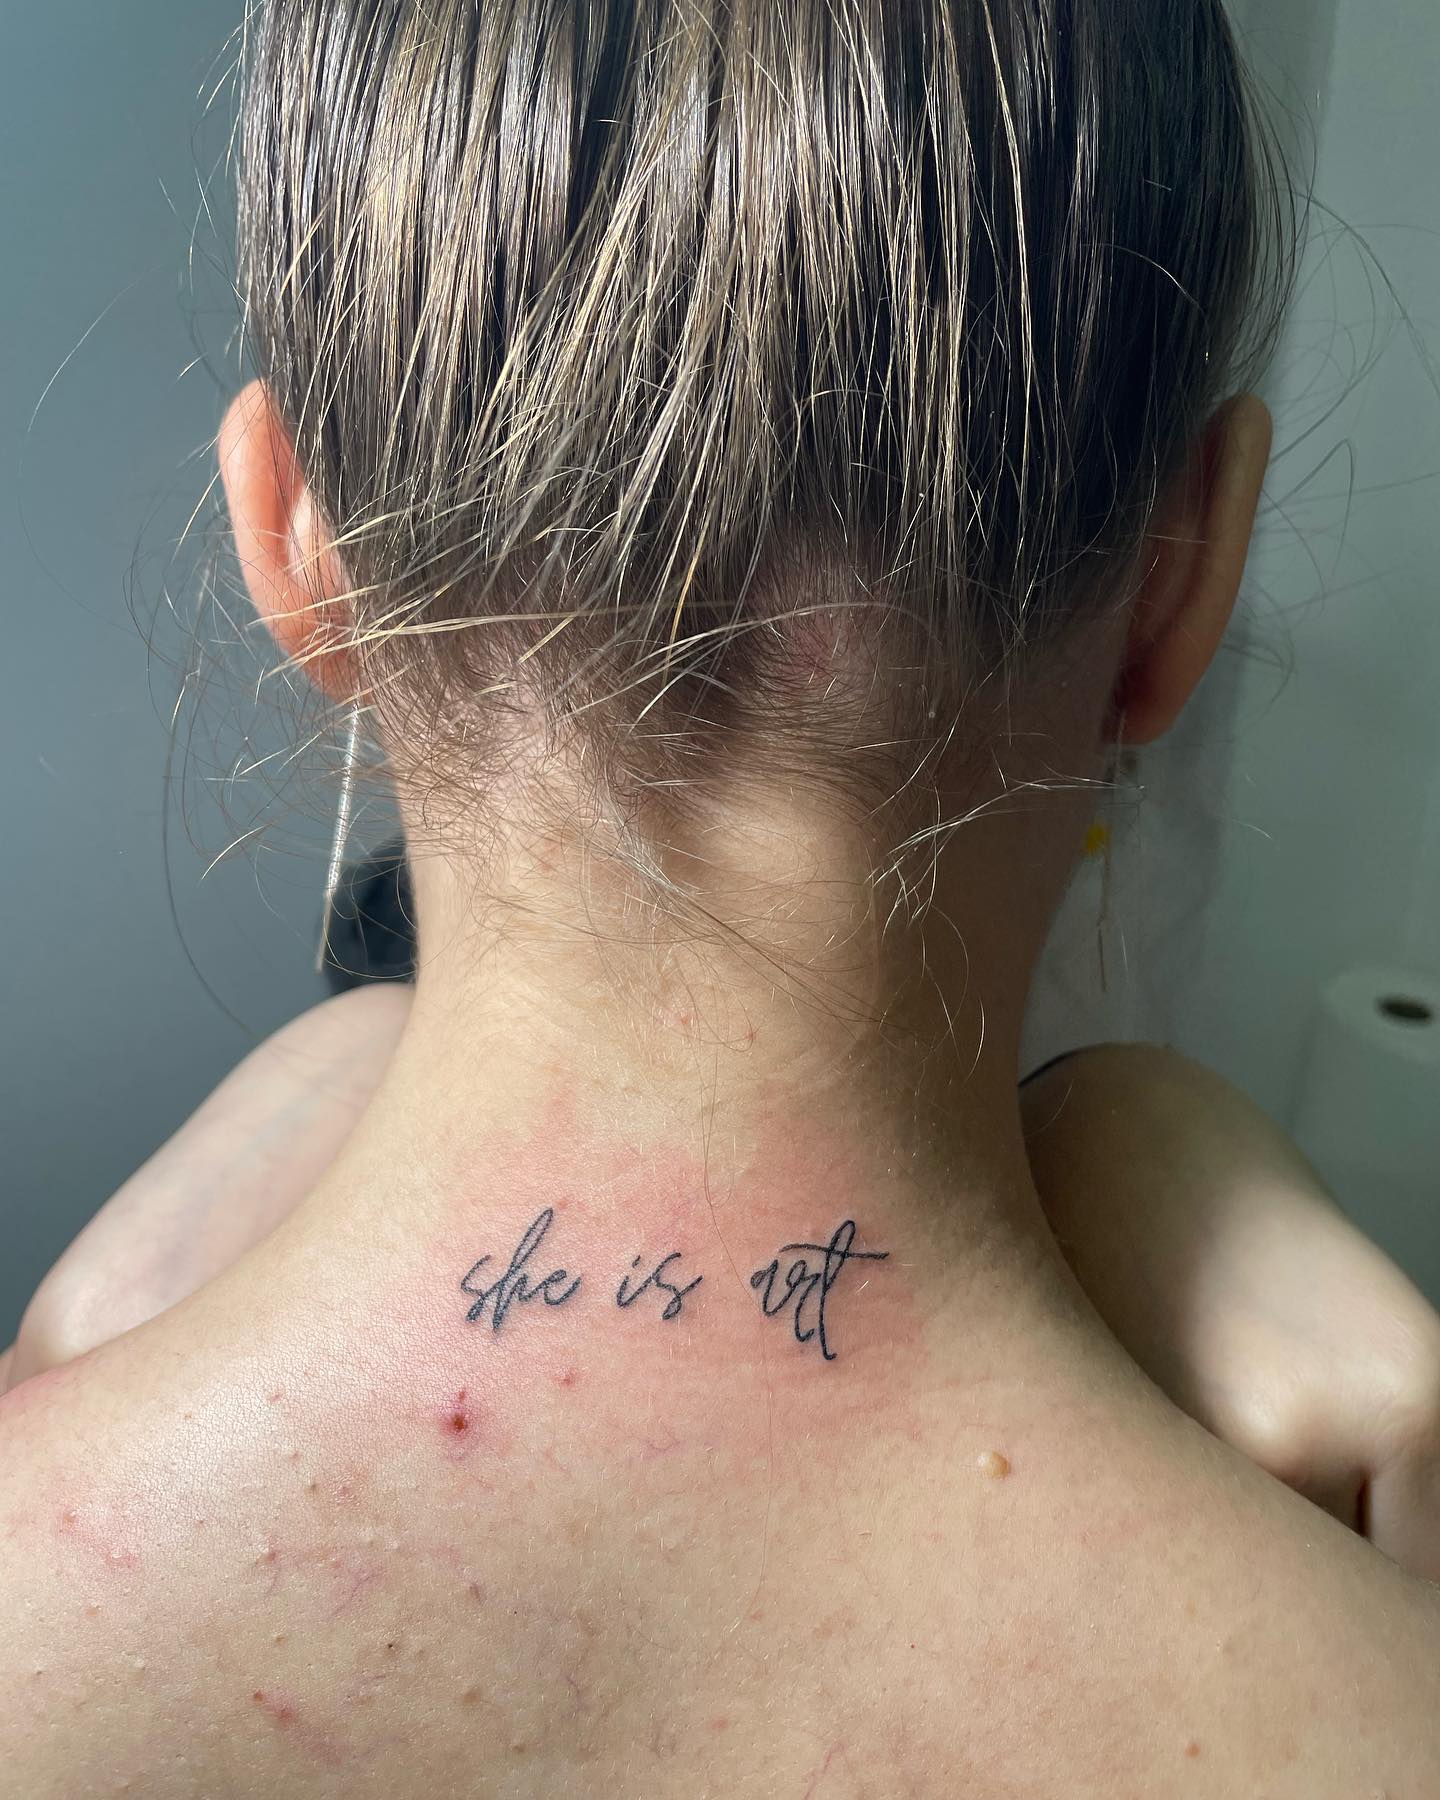 Show that you are a Virgo person with this tattoo. If just a symbol of Virgo is not enough for you, trying something creative is always a good idea.